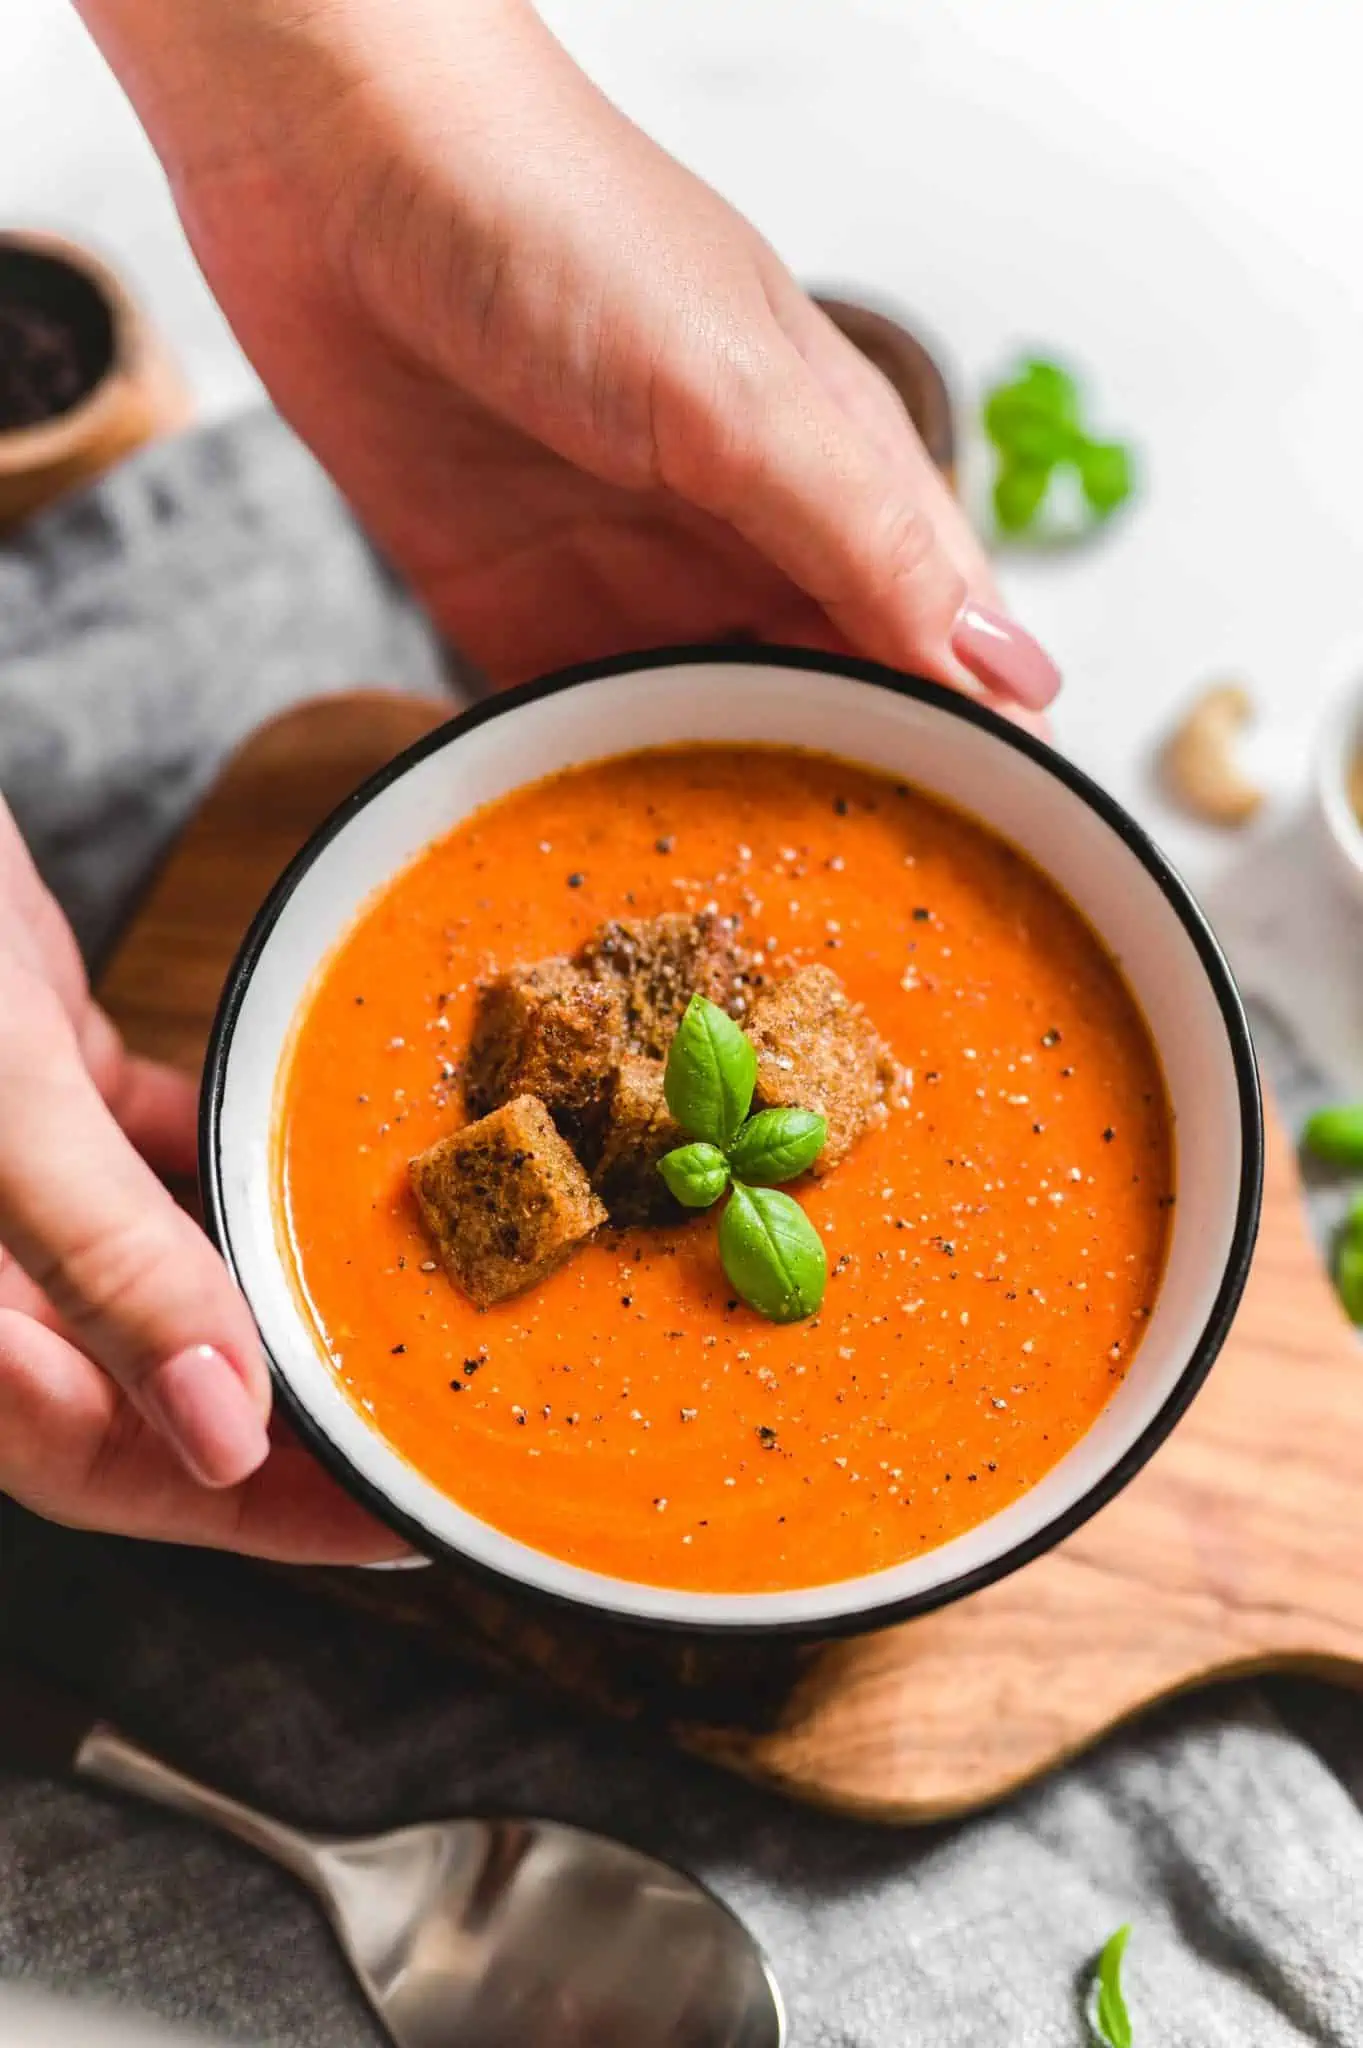 Creamy tomato soup in a bowl topped with croutons, fresh basil leaves, and cracked black pepper.